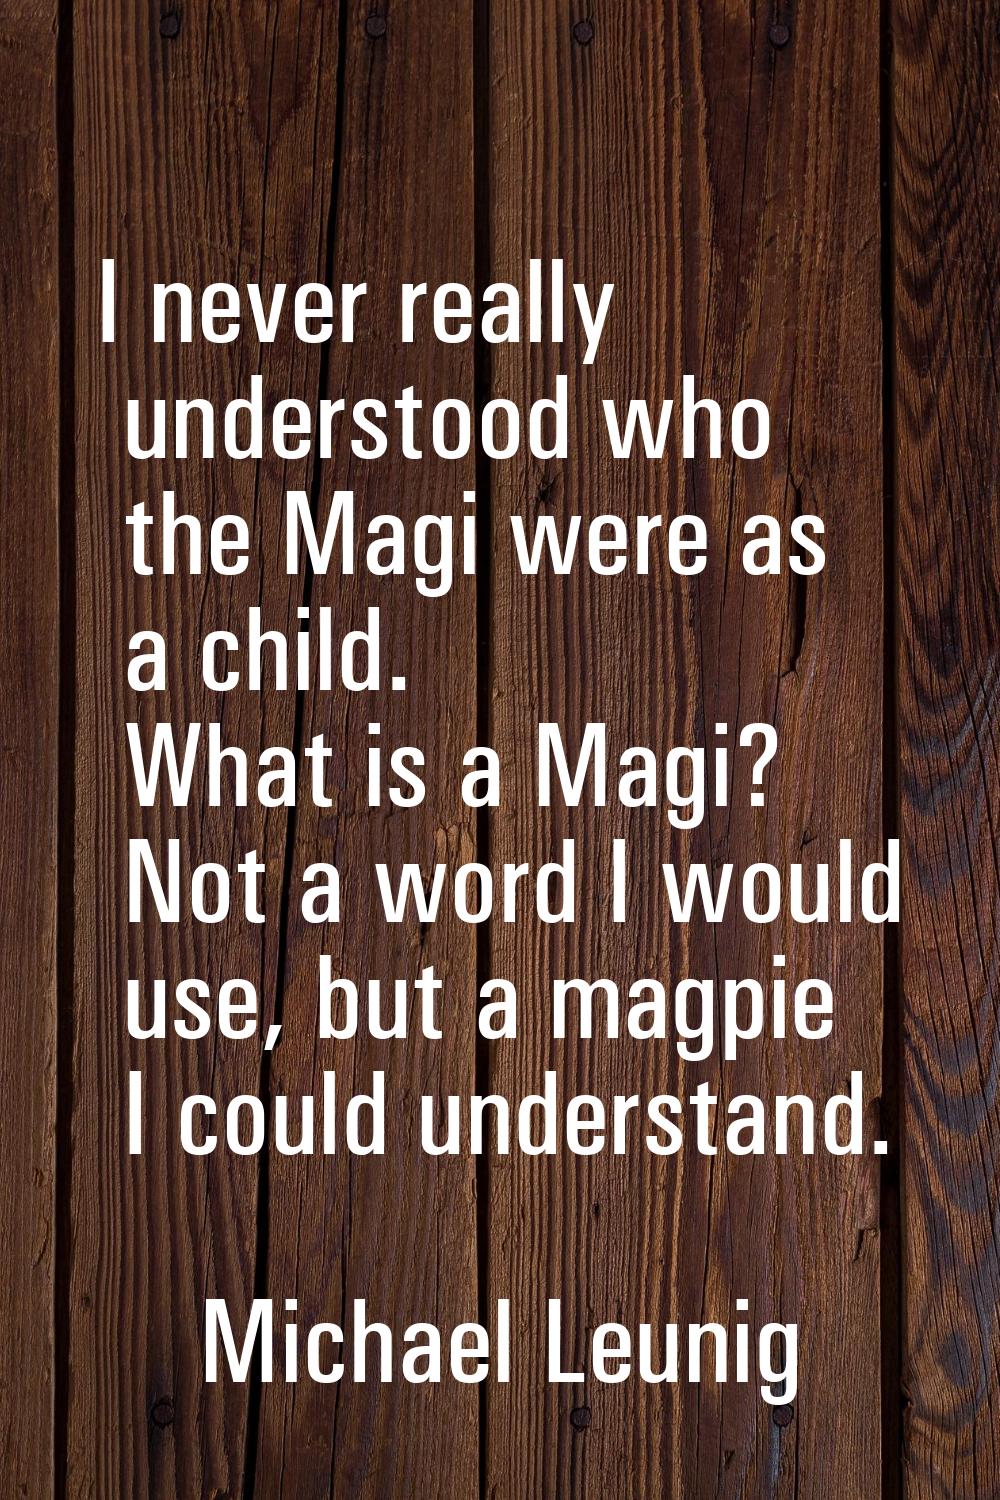 I never really understood who the Magi were as a child. What is a Magi? Not a word I would use, but